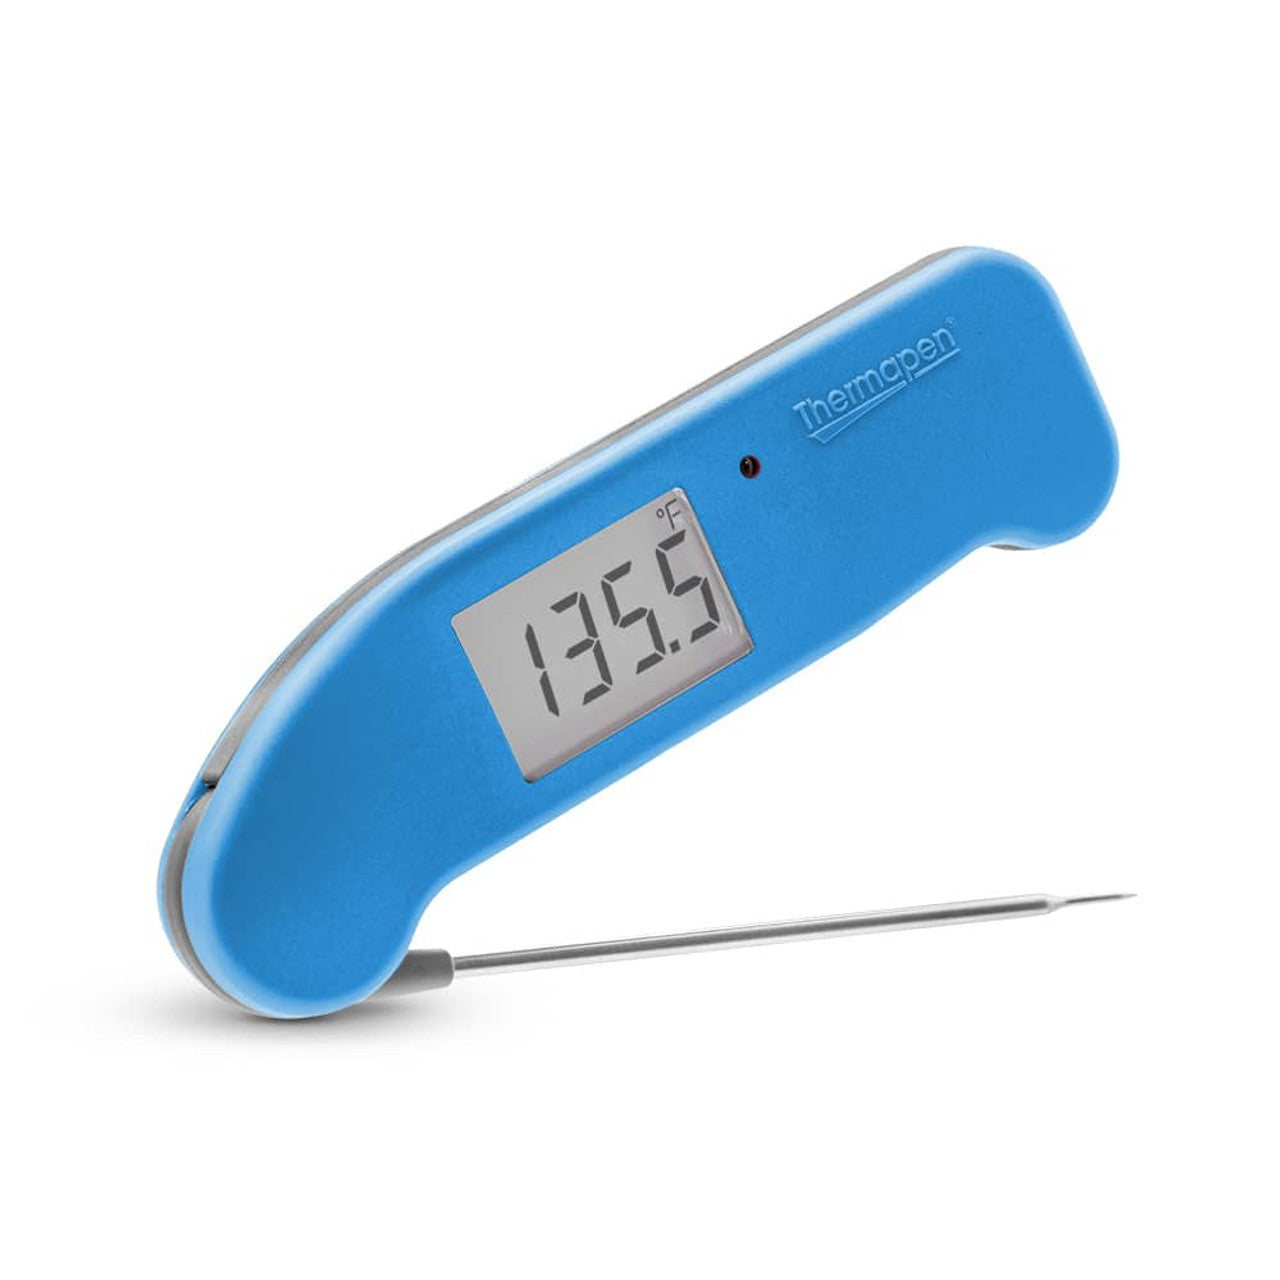 New Toy Tool - Thermapen Splash-Proof Thermometer - Food & FireFood & Fire